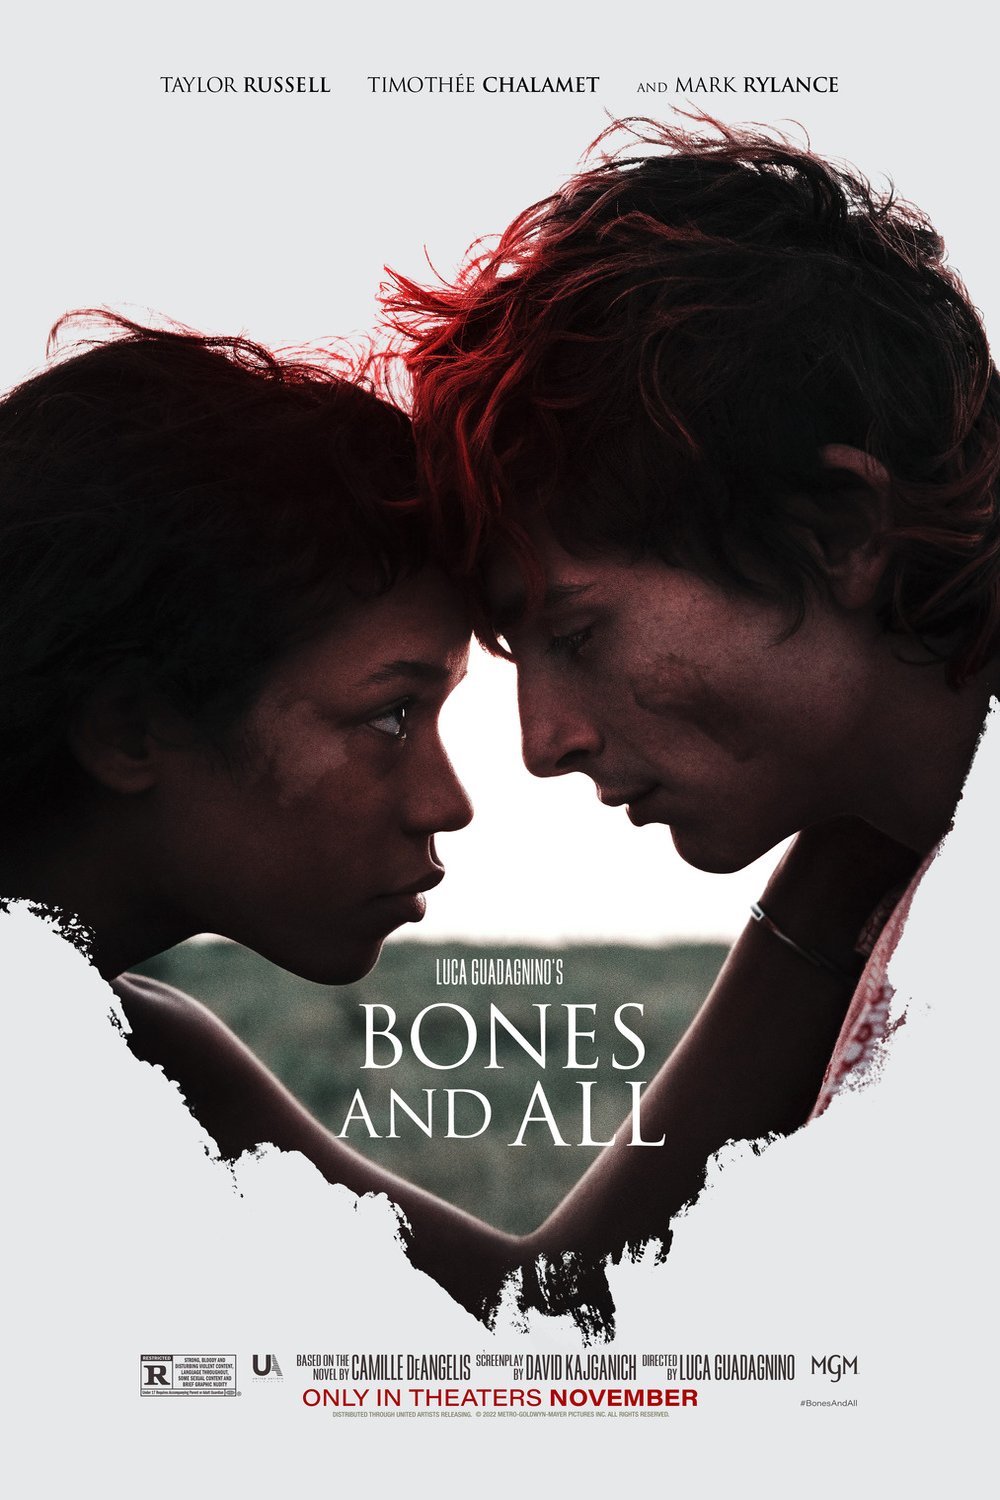 Poster of the movie Bones and All v.f.